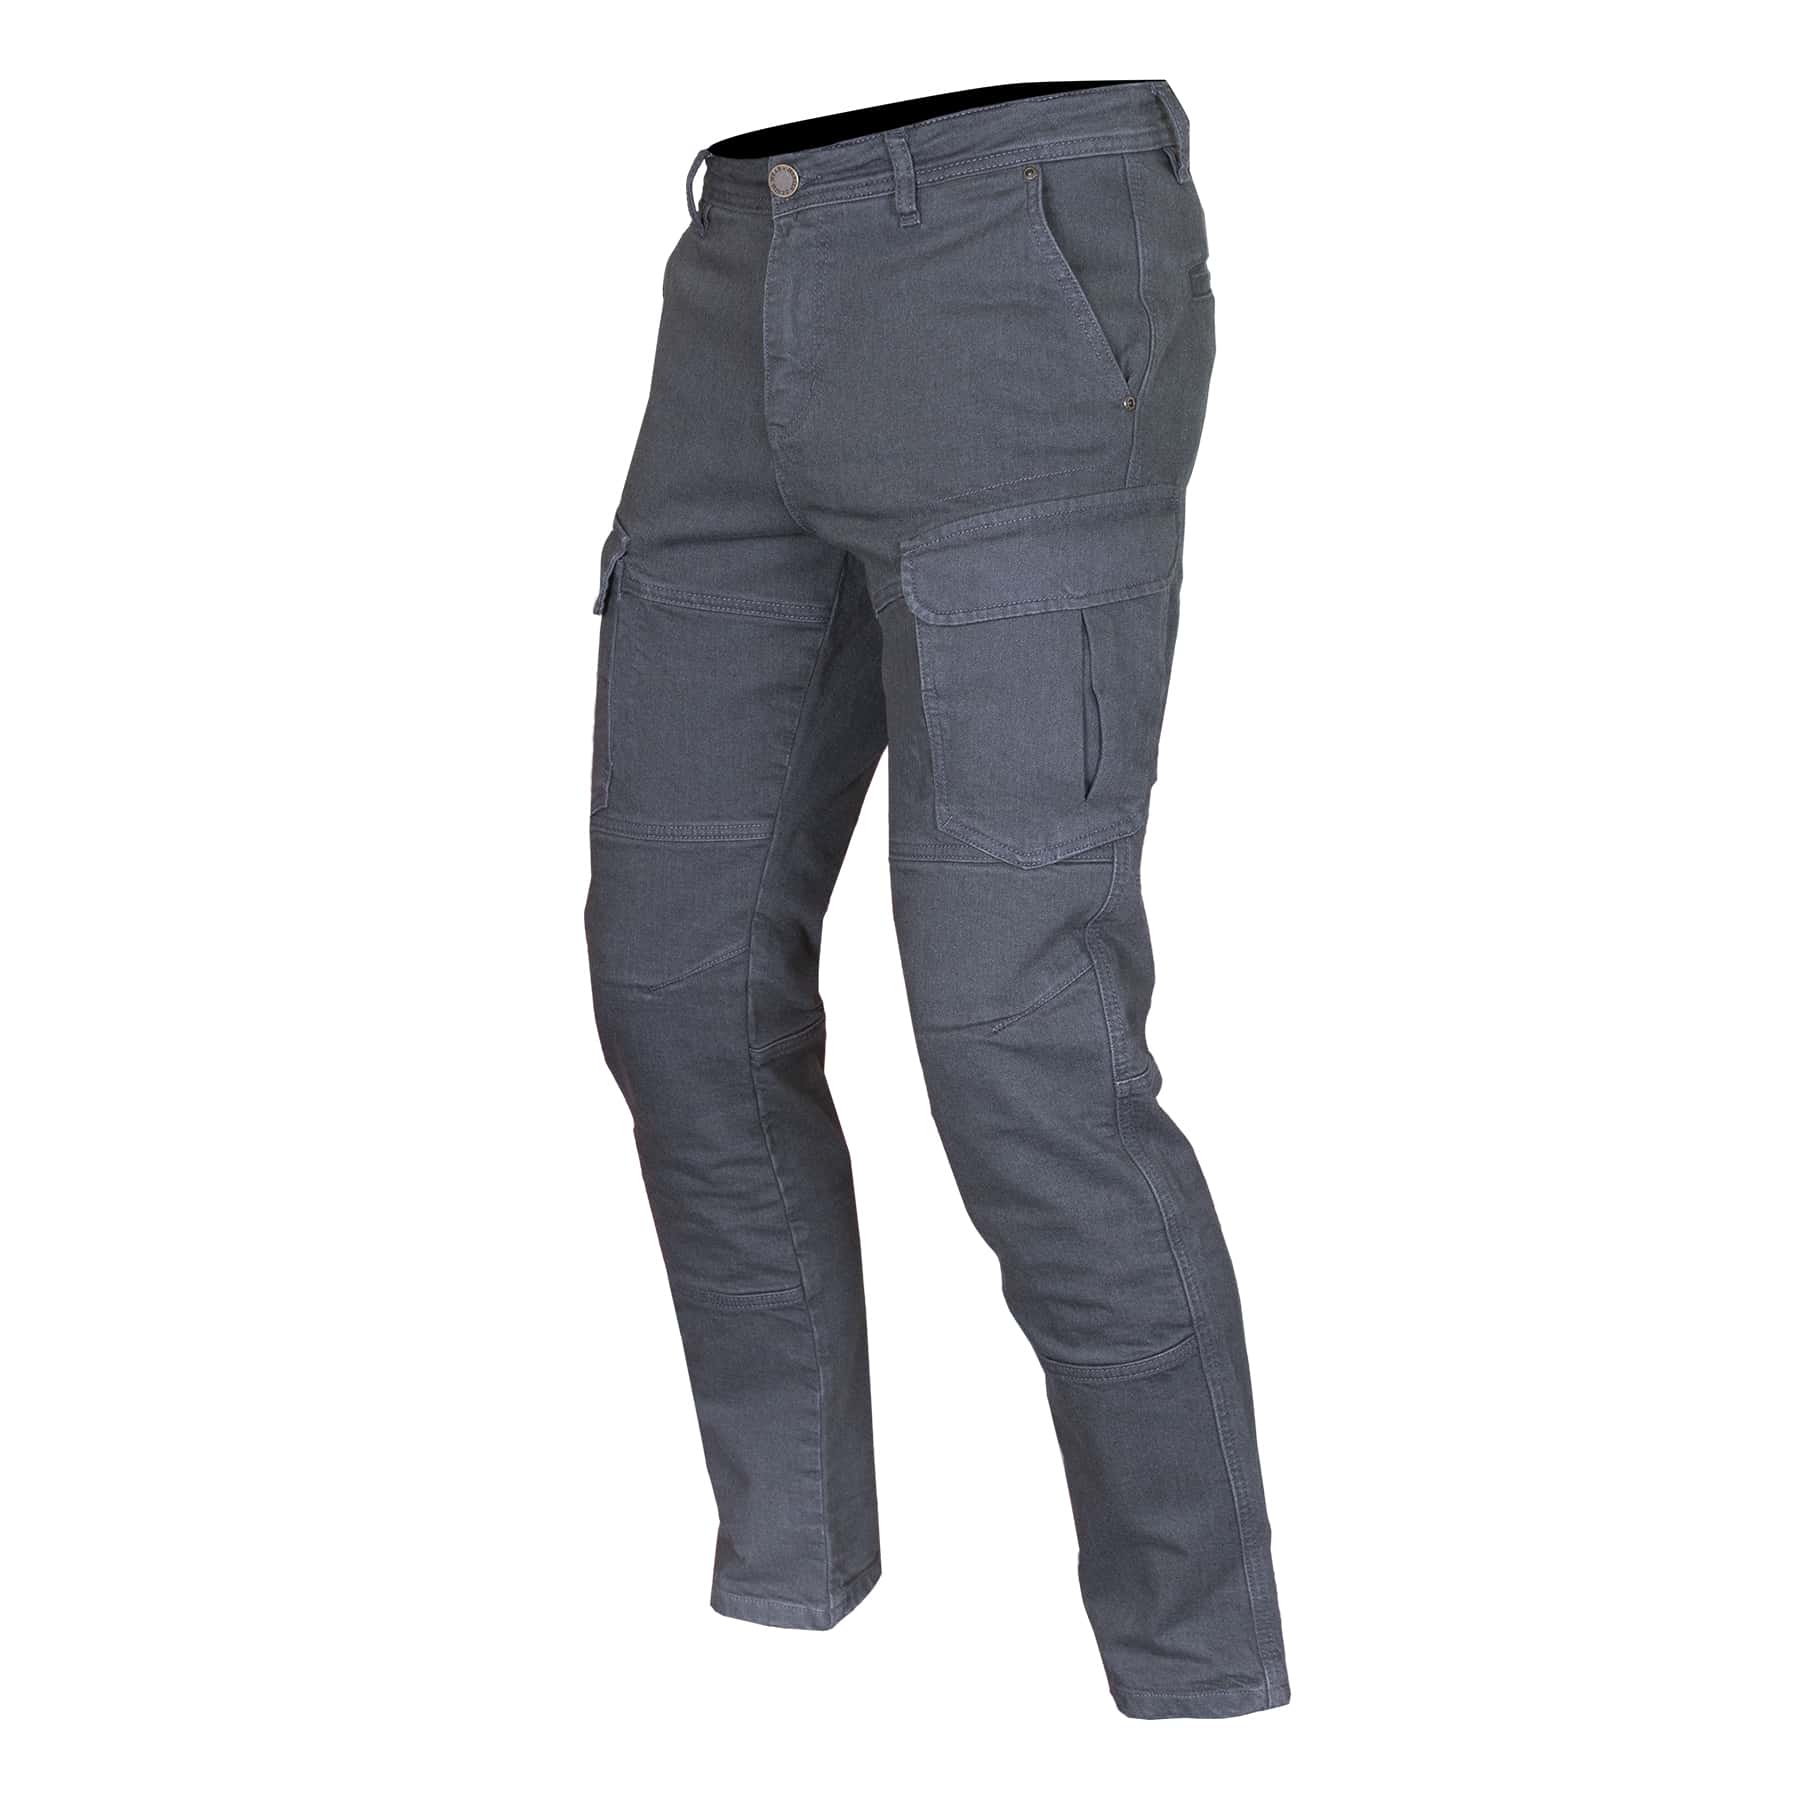 A lifestyle image of the Merlin Warren cargo riding jeans